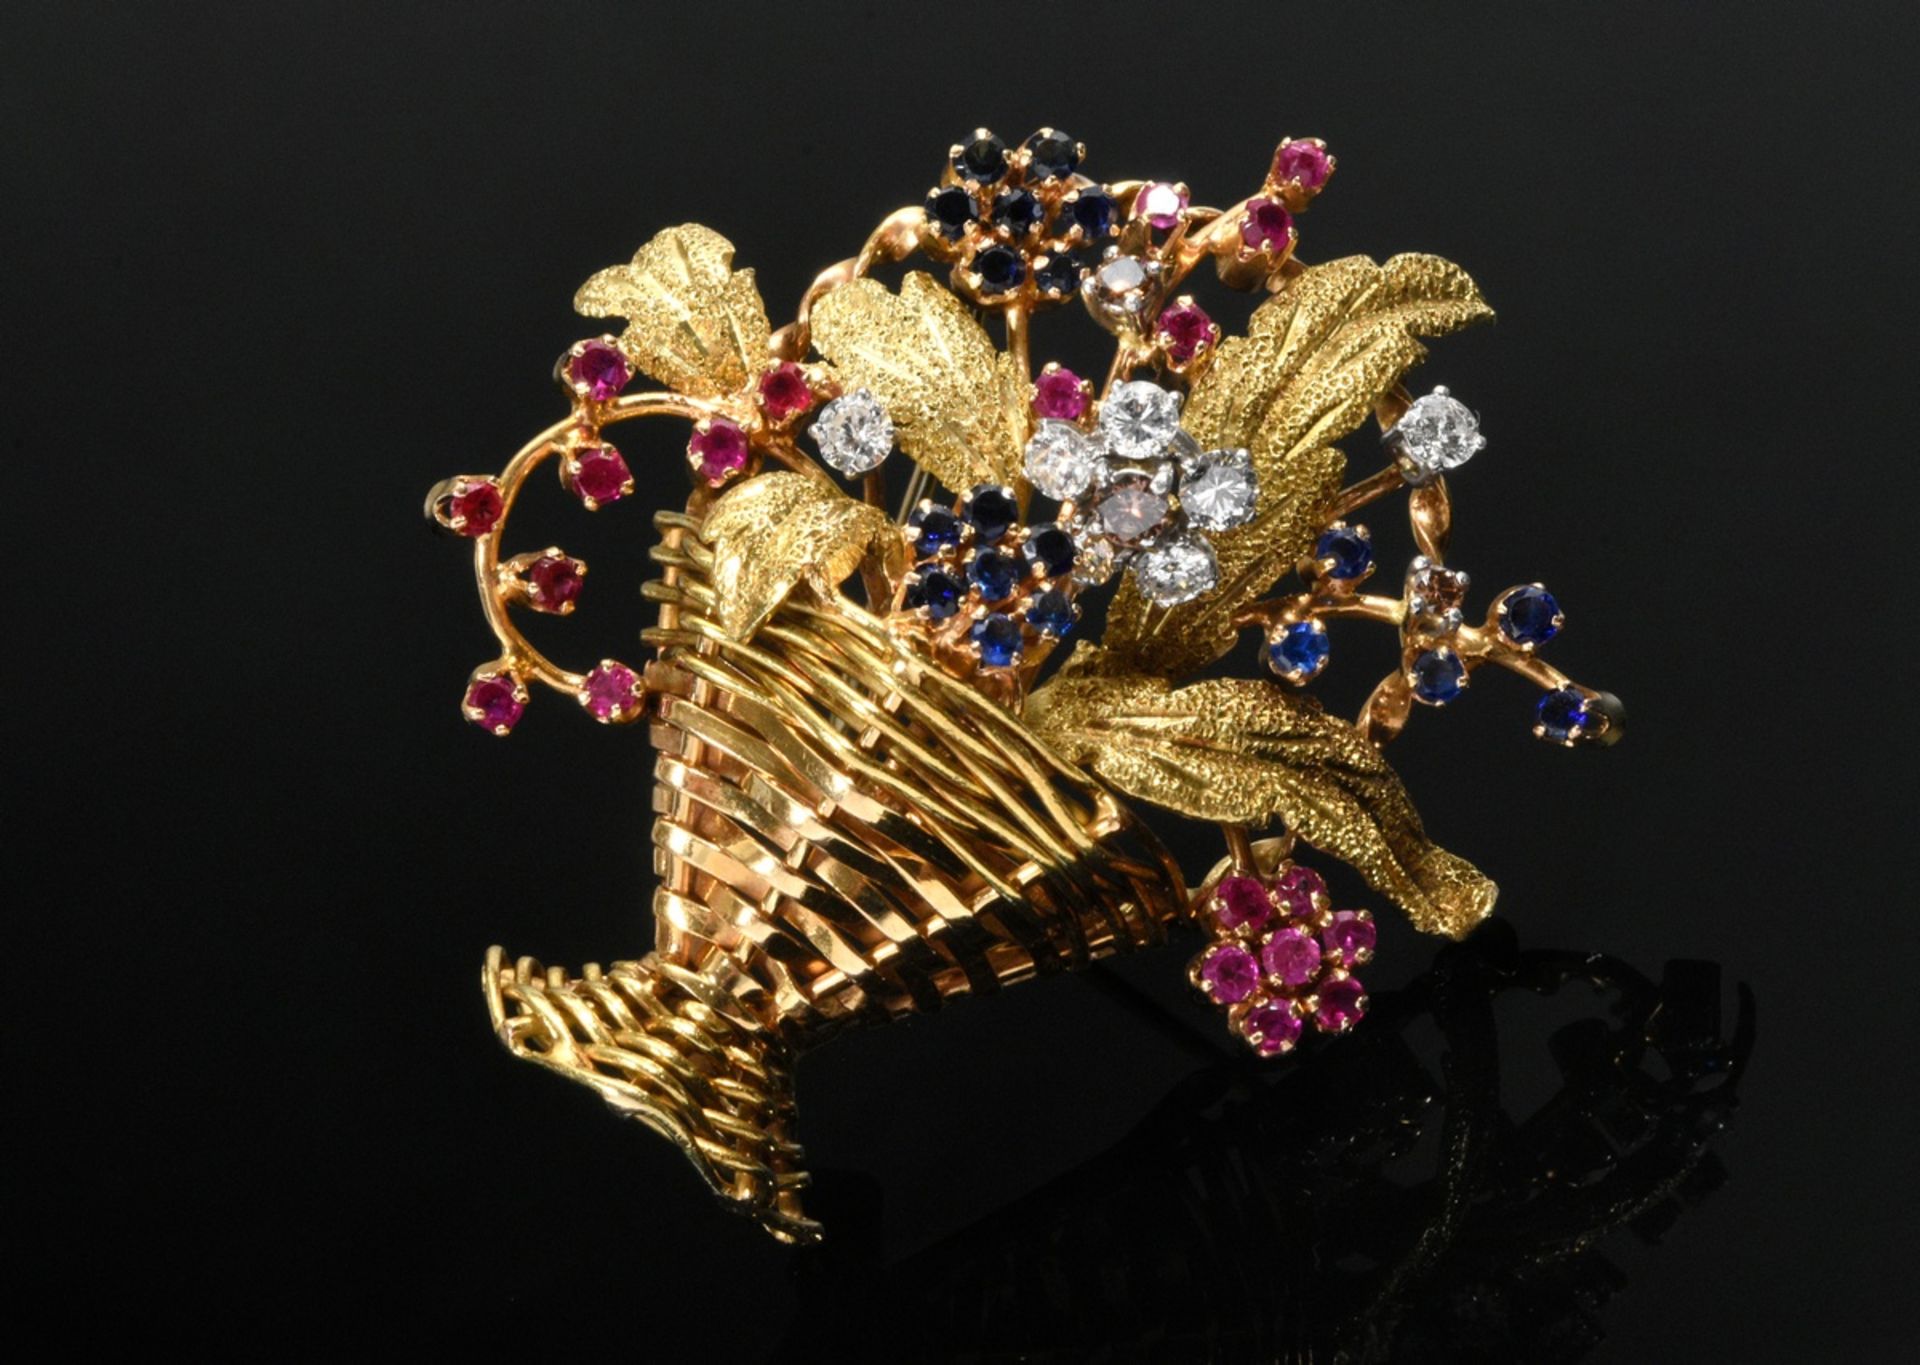 Fine yellow gold 750 flower basket needle with sapphires, rubies and brilliant-cut diamonds (approx - Image 2 of 3